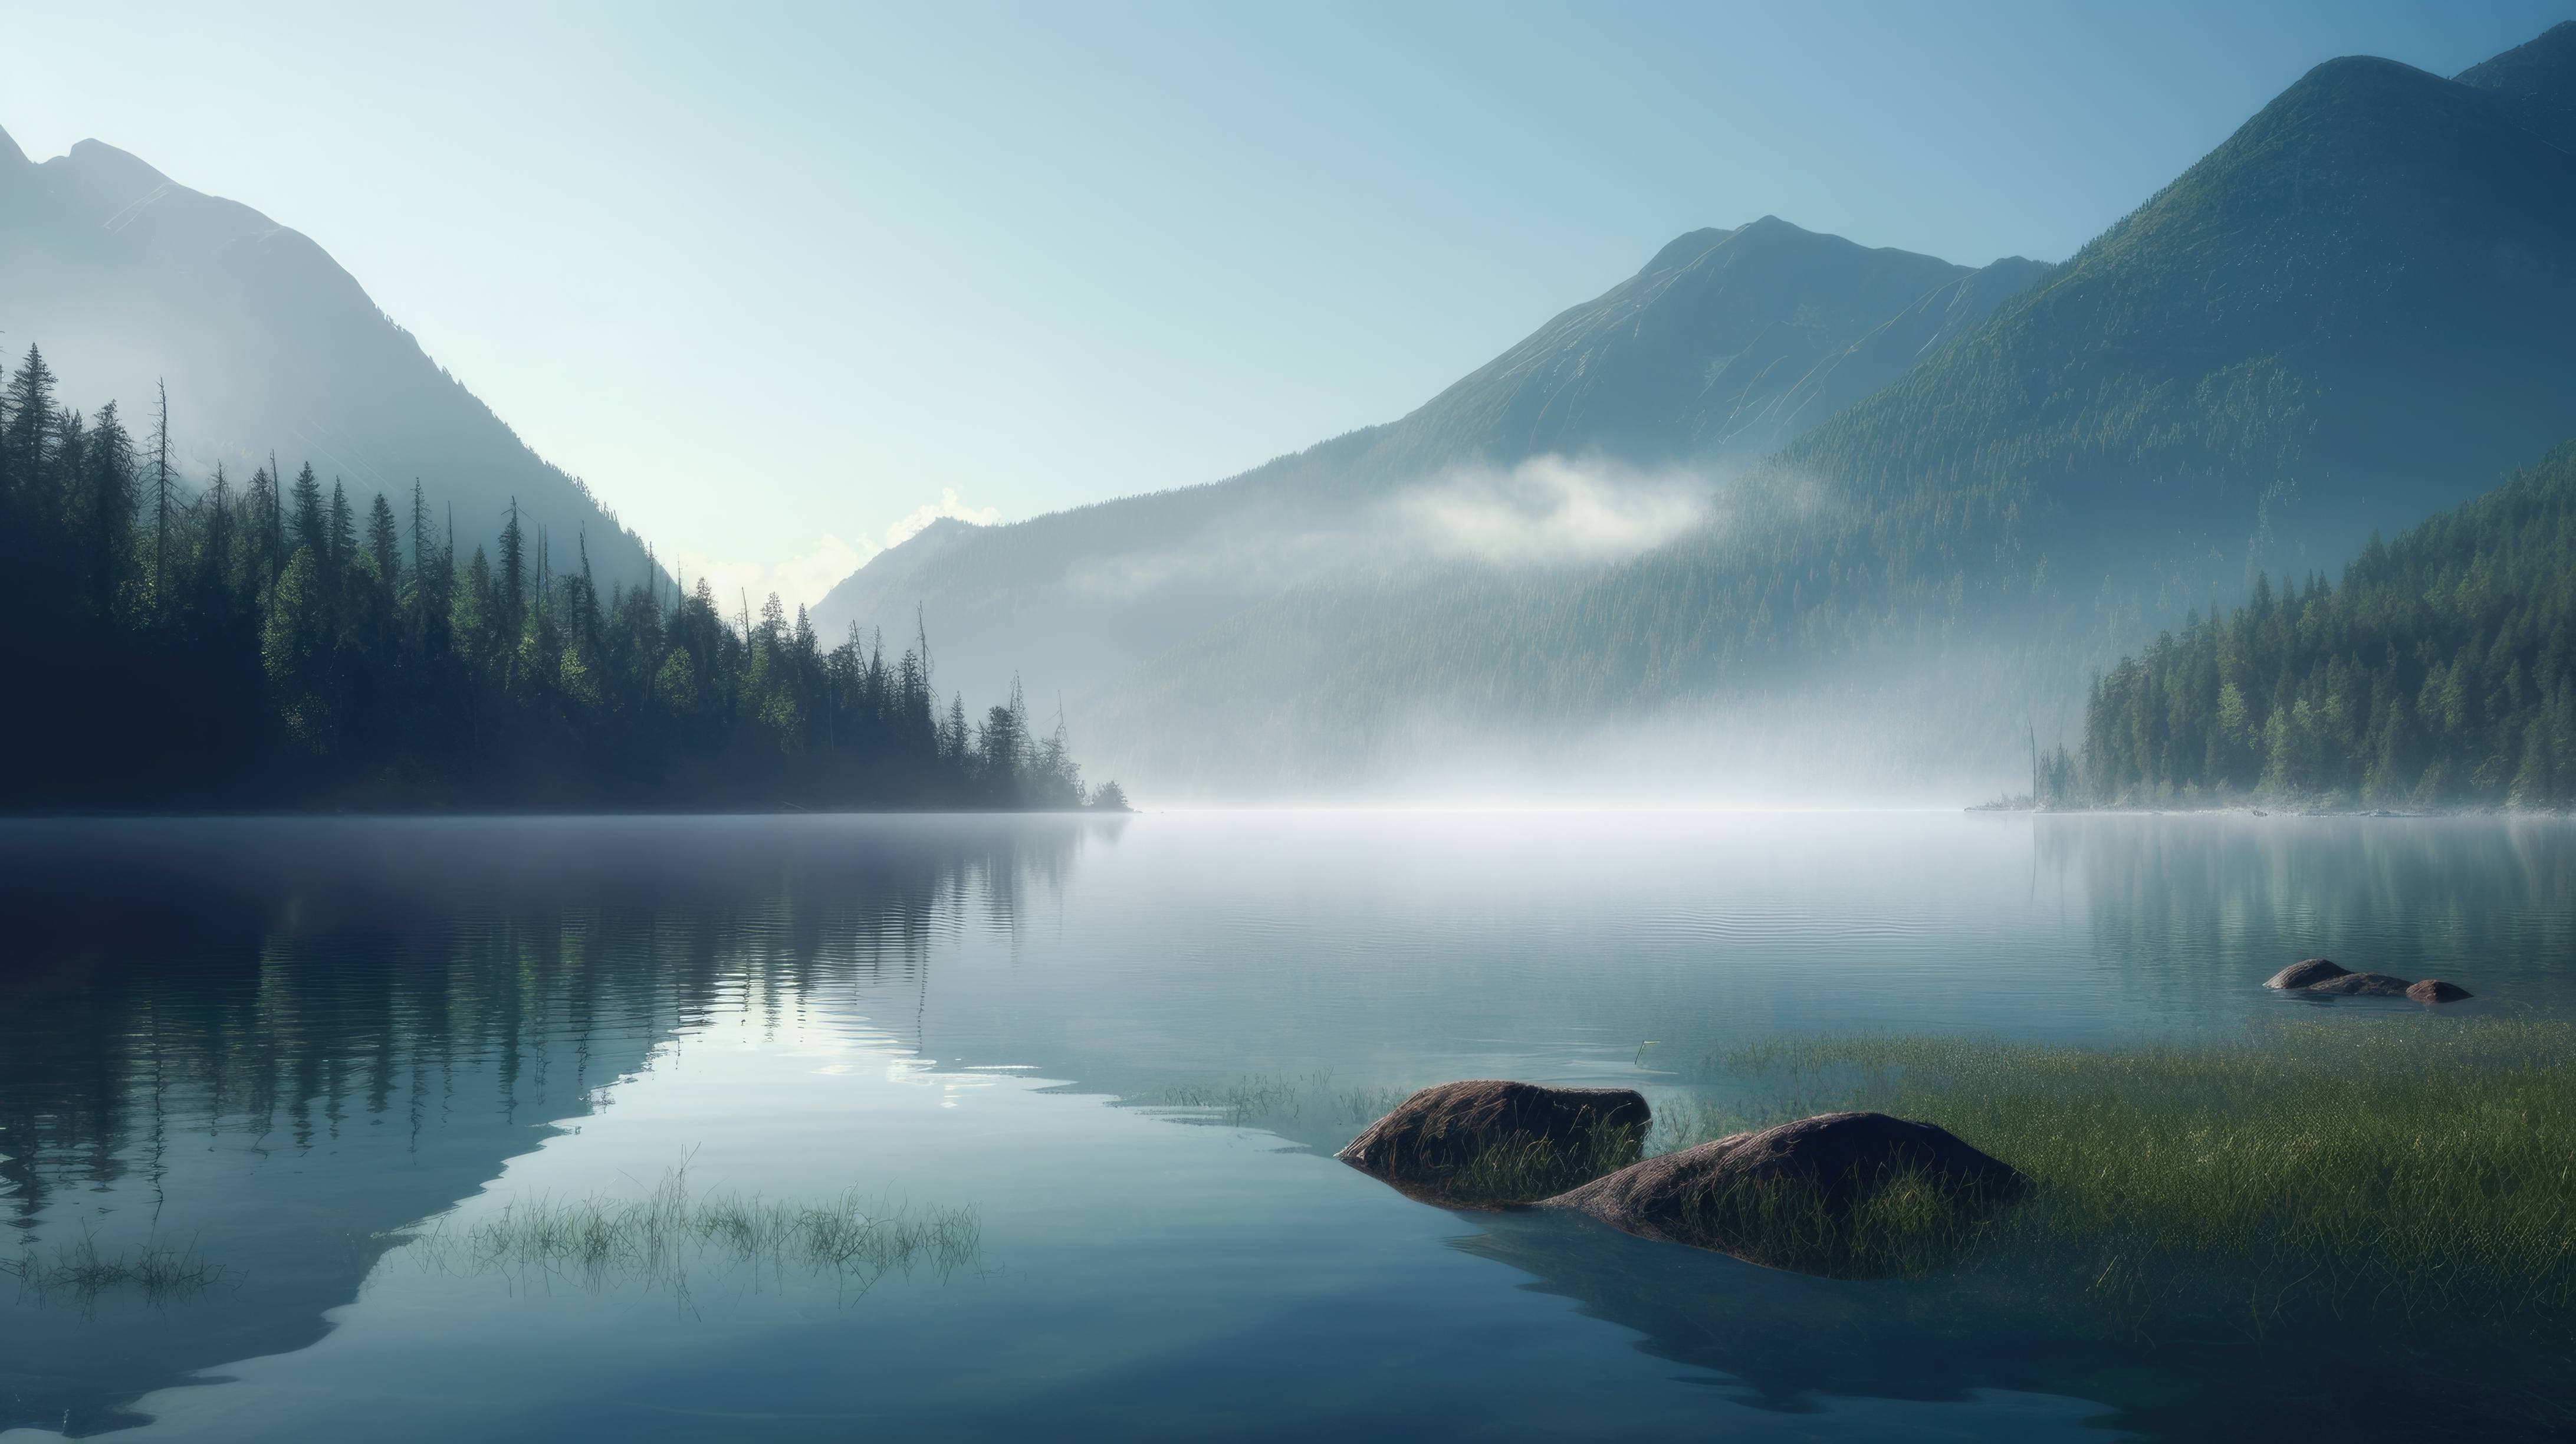 A Peaceful Desktop Wallpaper Featuring Serene Lake Surrounded By